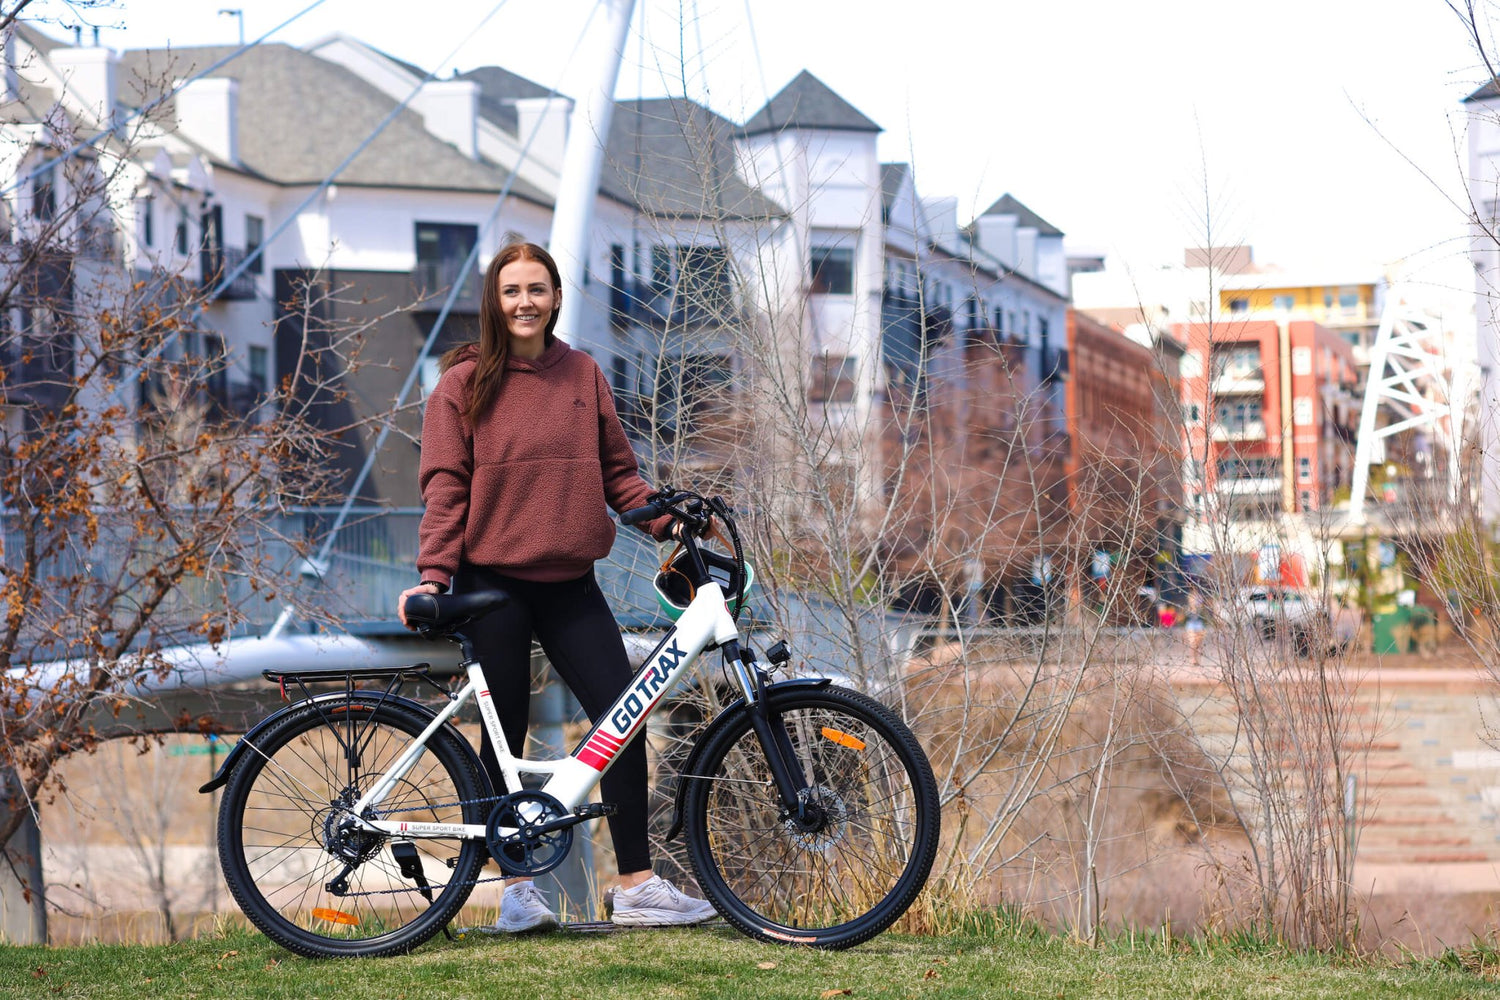 How Electric Bikes are Helping Revitalize Neighborhoods - GOTRAX